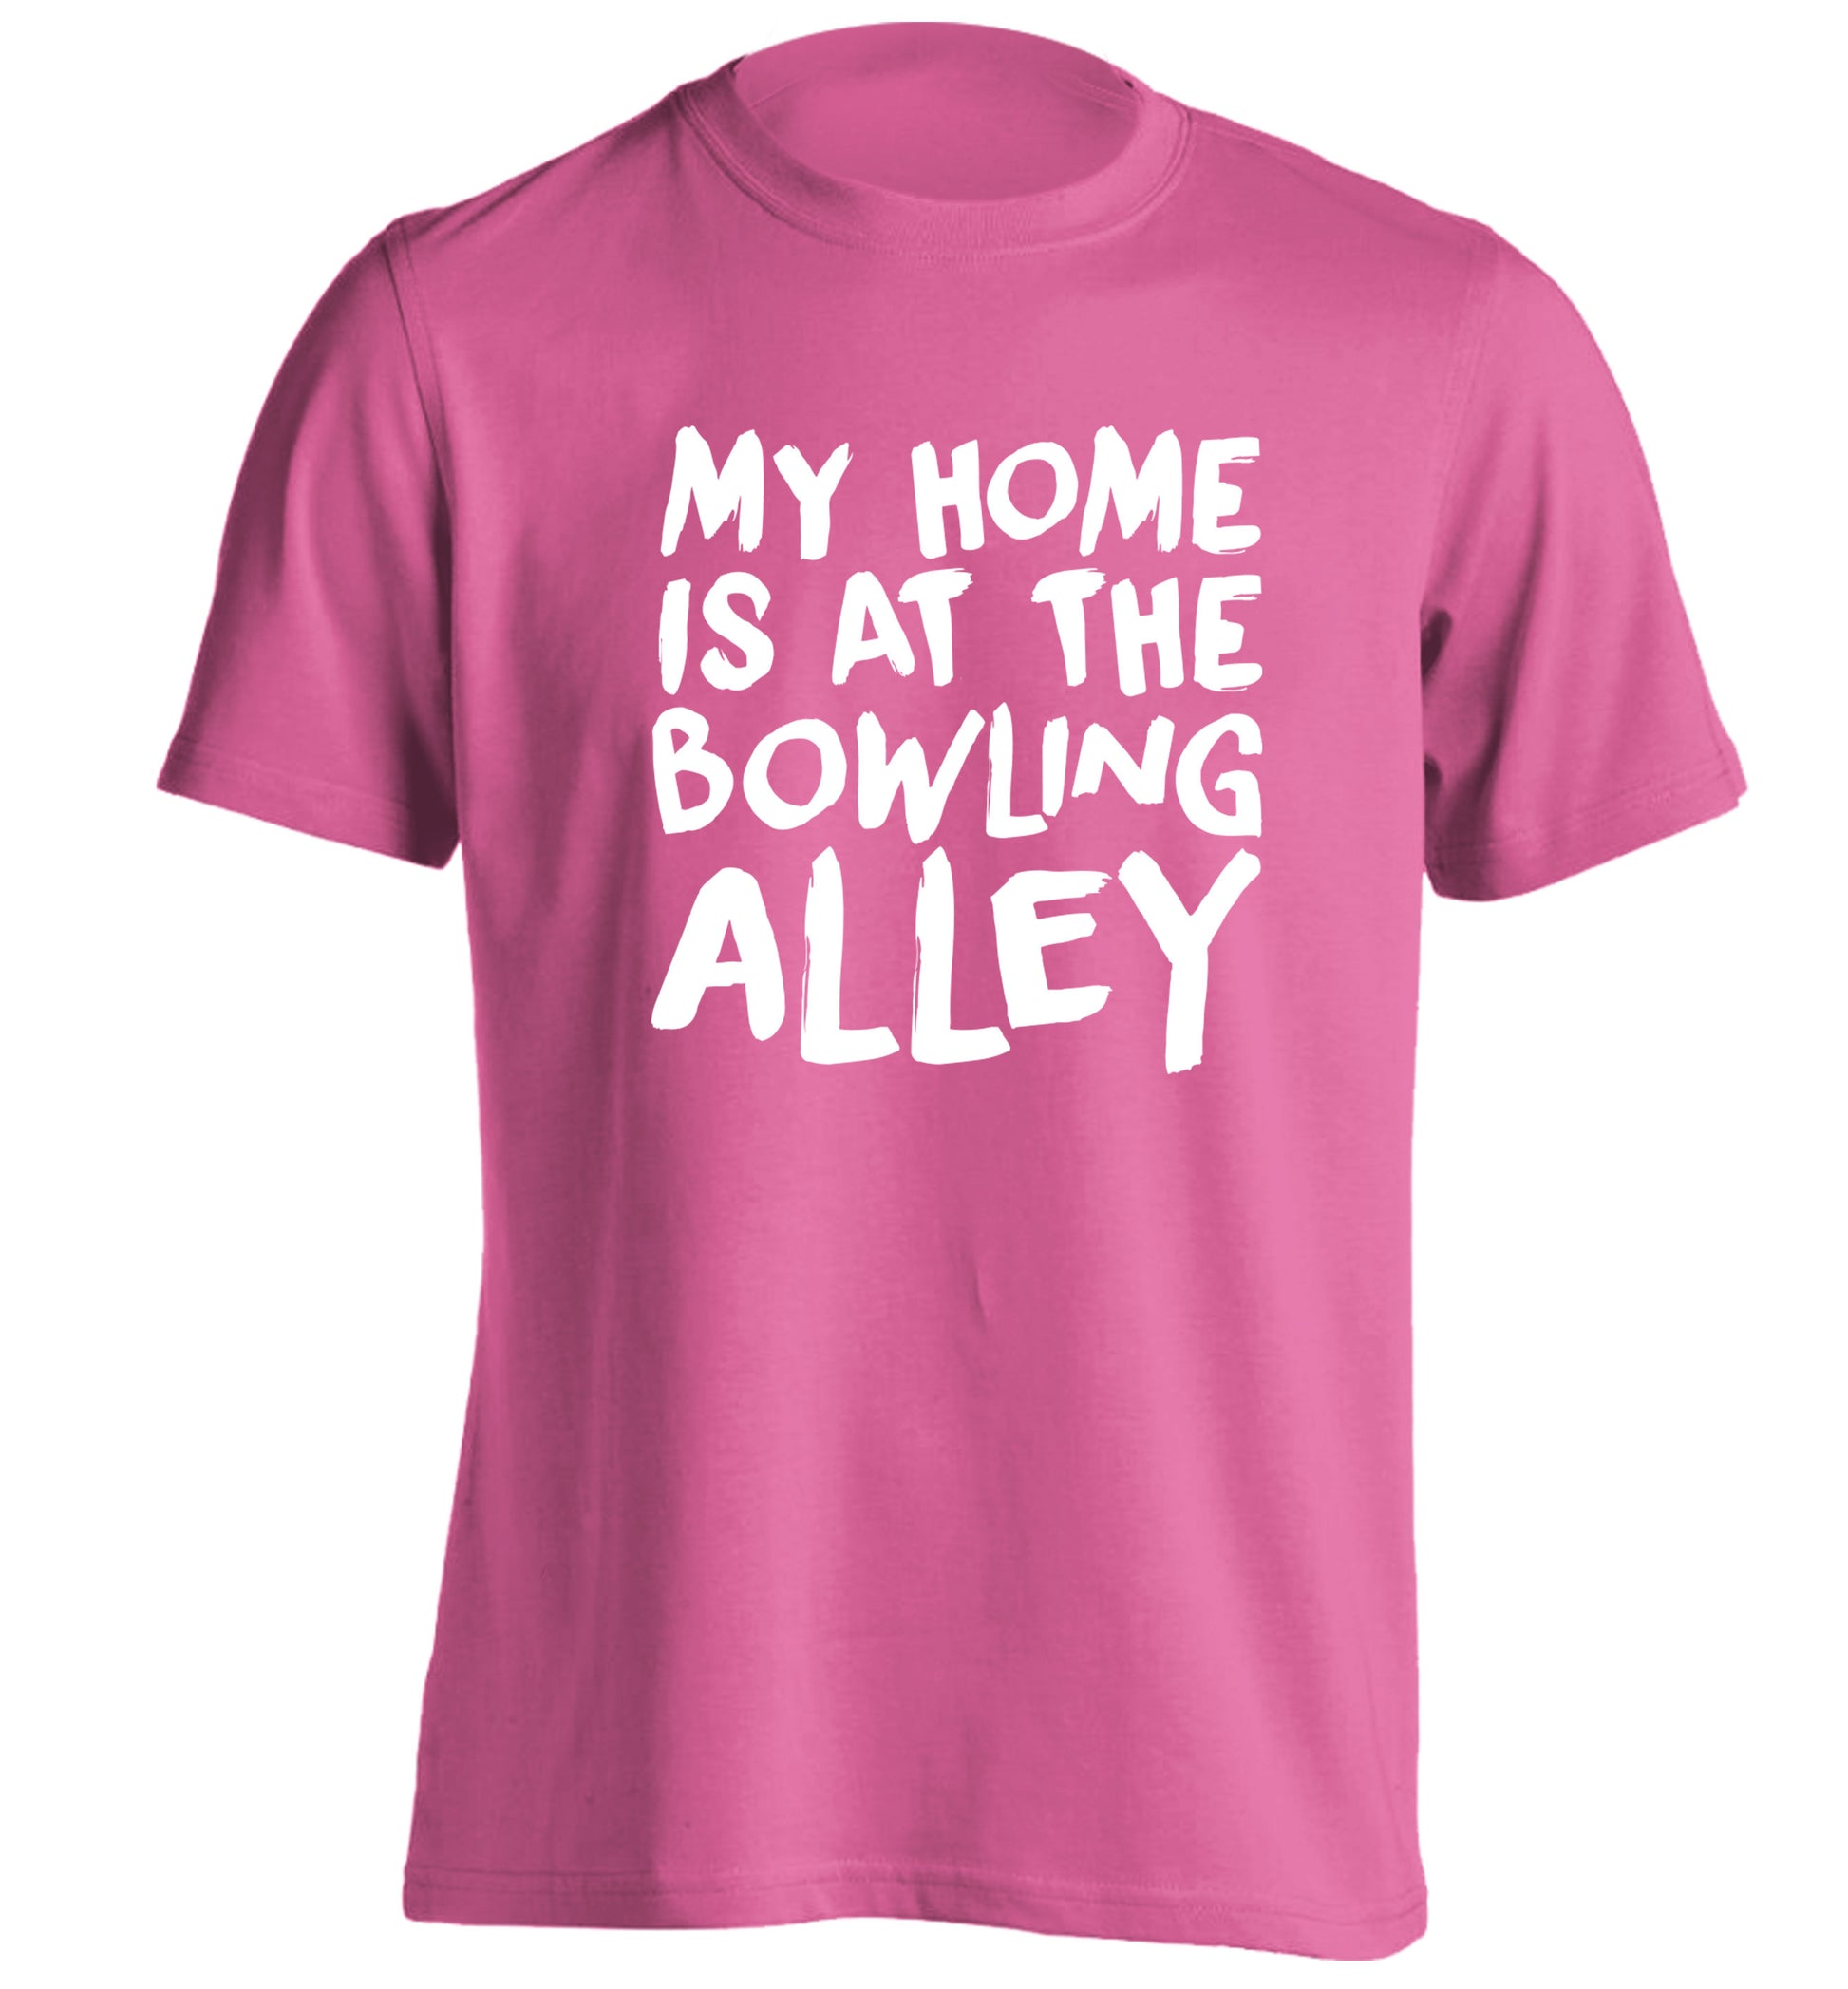 My home is at the bowling alley adults unisex pink Tshirt 2XL